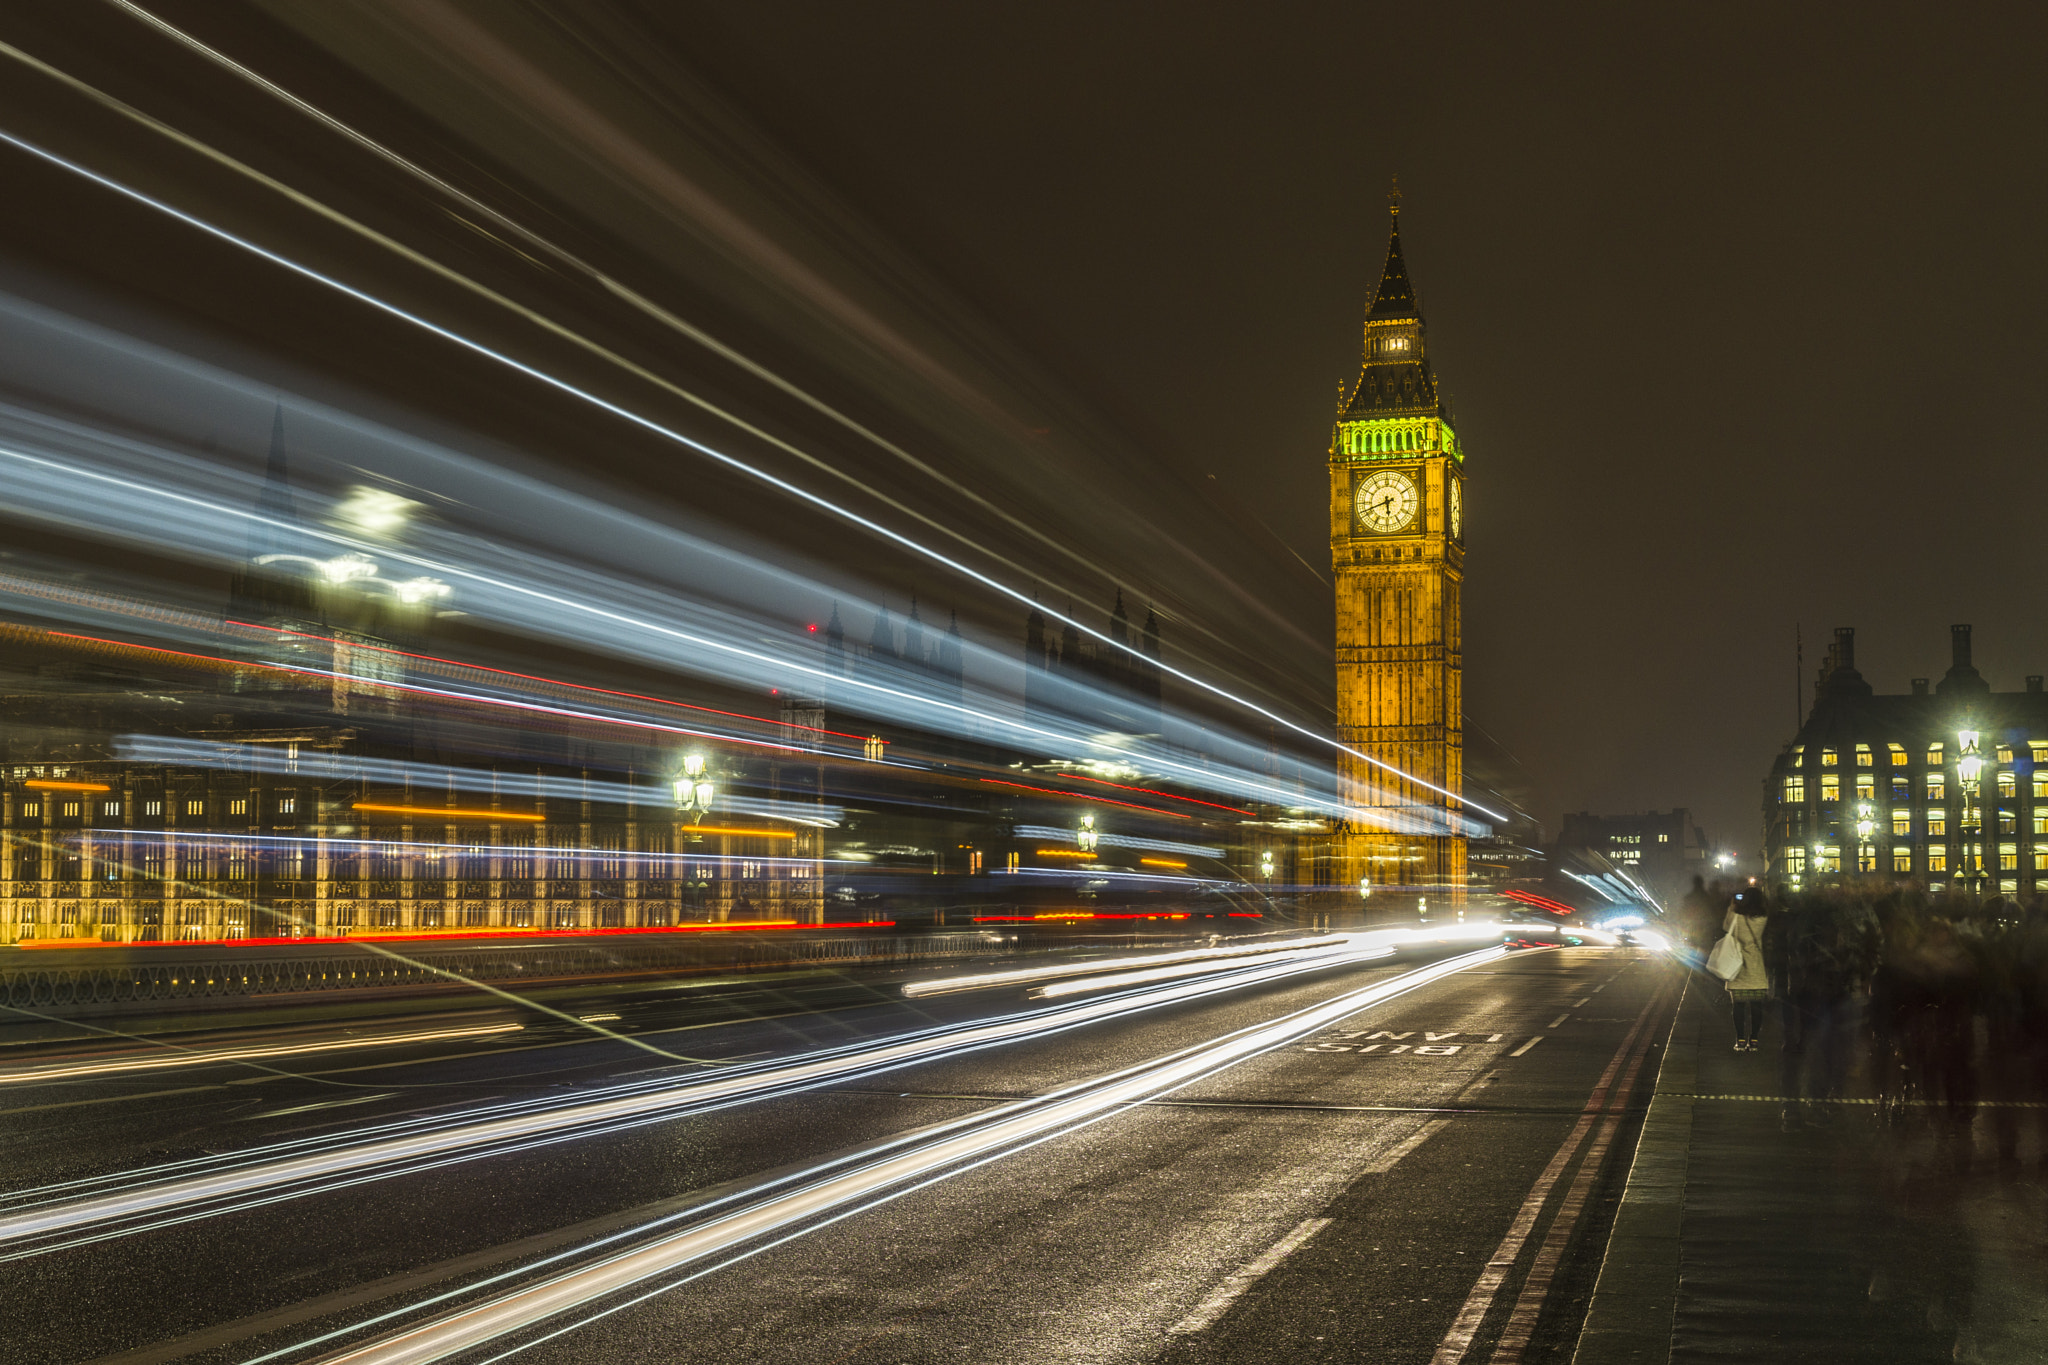 Sony a7 sample photo. Westminster palace big ben photography